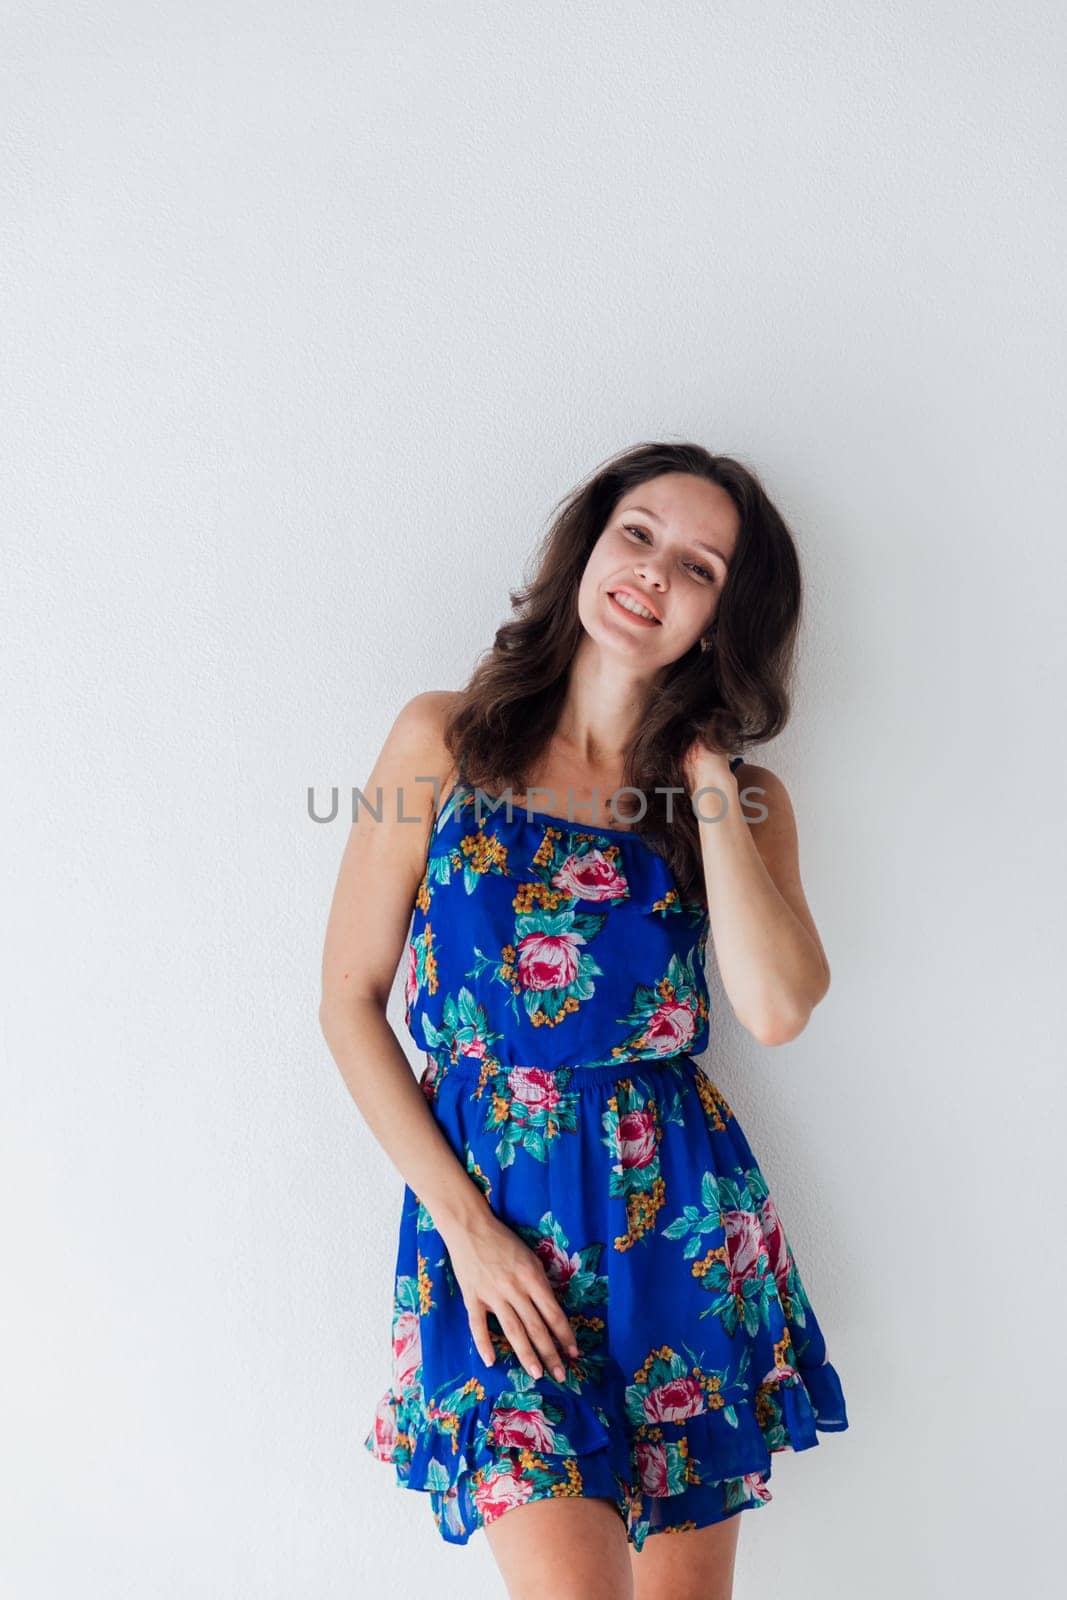 brunette woman in a blue floral dress against a white wall by Simakov